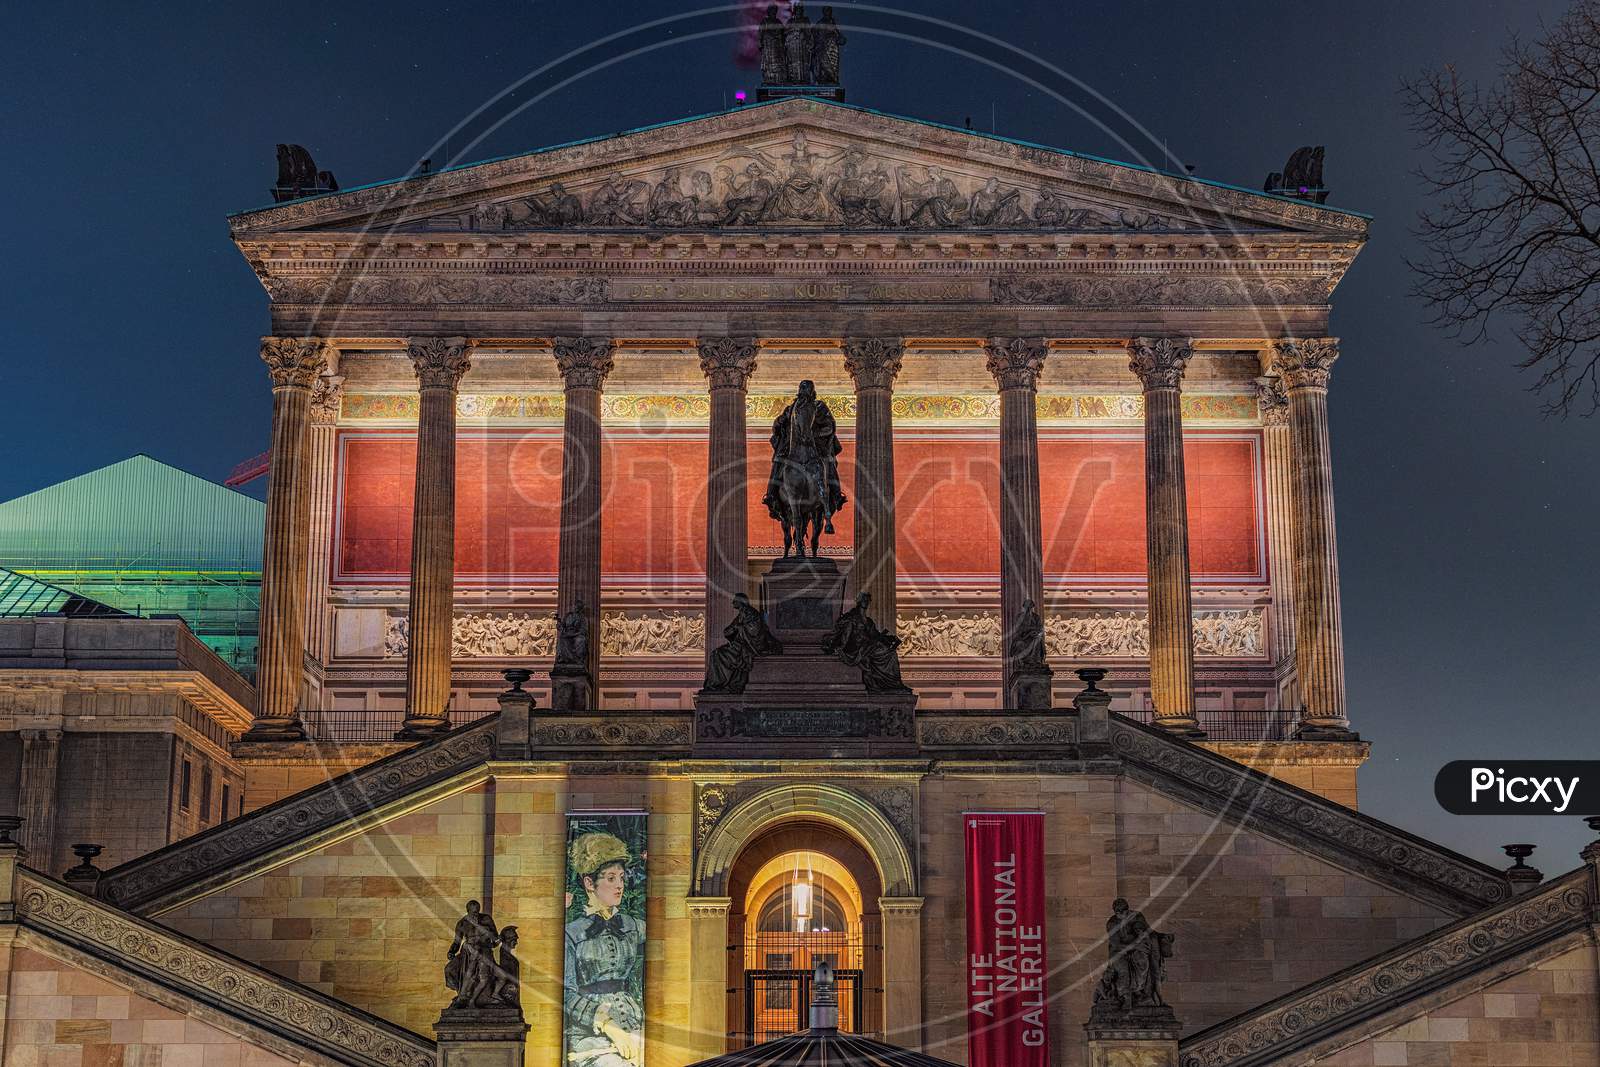 The Alte Nationalgalerie (Old National Gallery) Art Gallery In Berlin, Germany